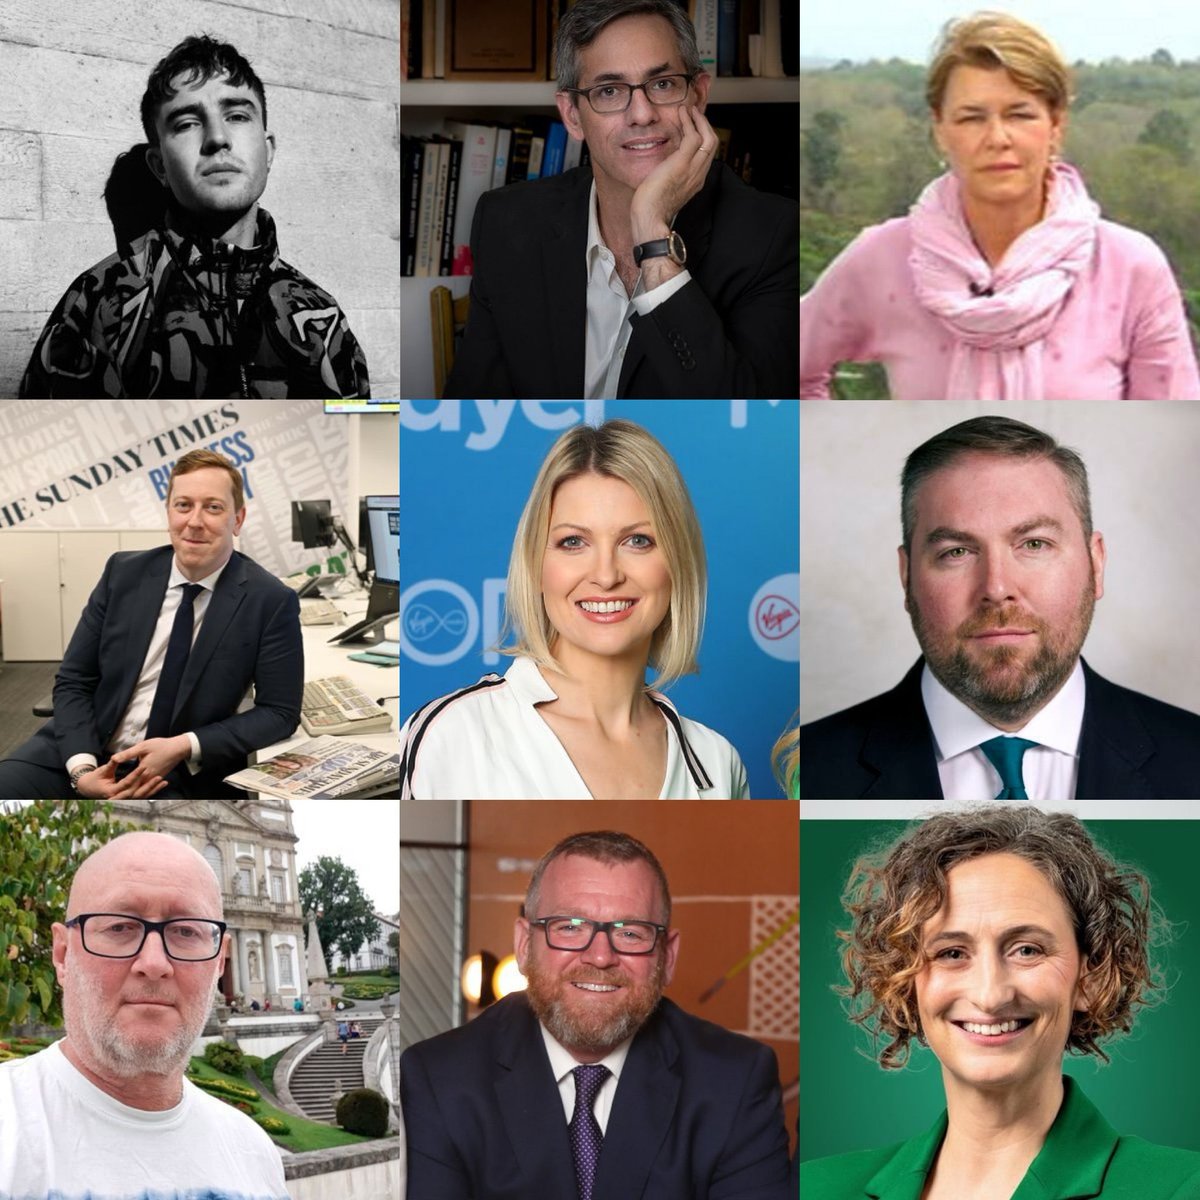 #TonightVMTV at 10pm with @ClaireBrockTV 🚨Protests at US colleges 🚨No accommodation for 100 asylum seekers today 🚨World Press Freedom Day #MichaelCullen @DavidNMyersUCLA @AlexCrawfordSky @oconnellhugh @barrymward @KeithMillsD7 @colm_oreilly71 @LNBDublin